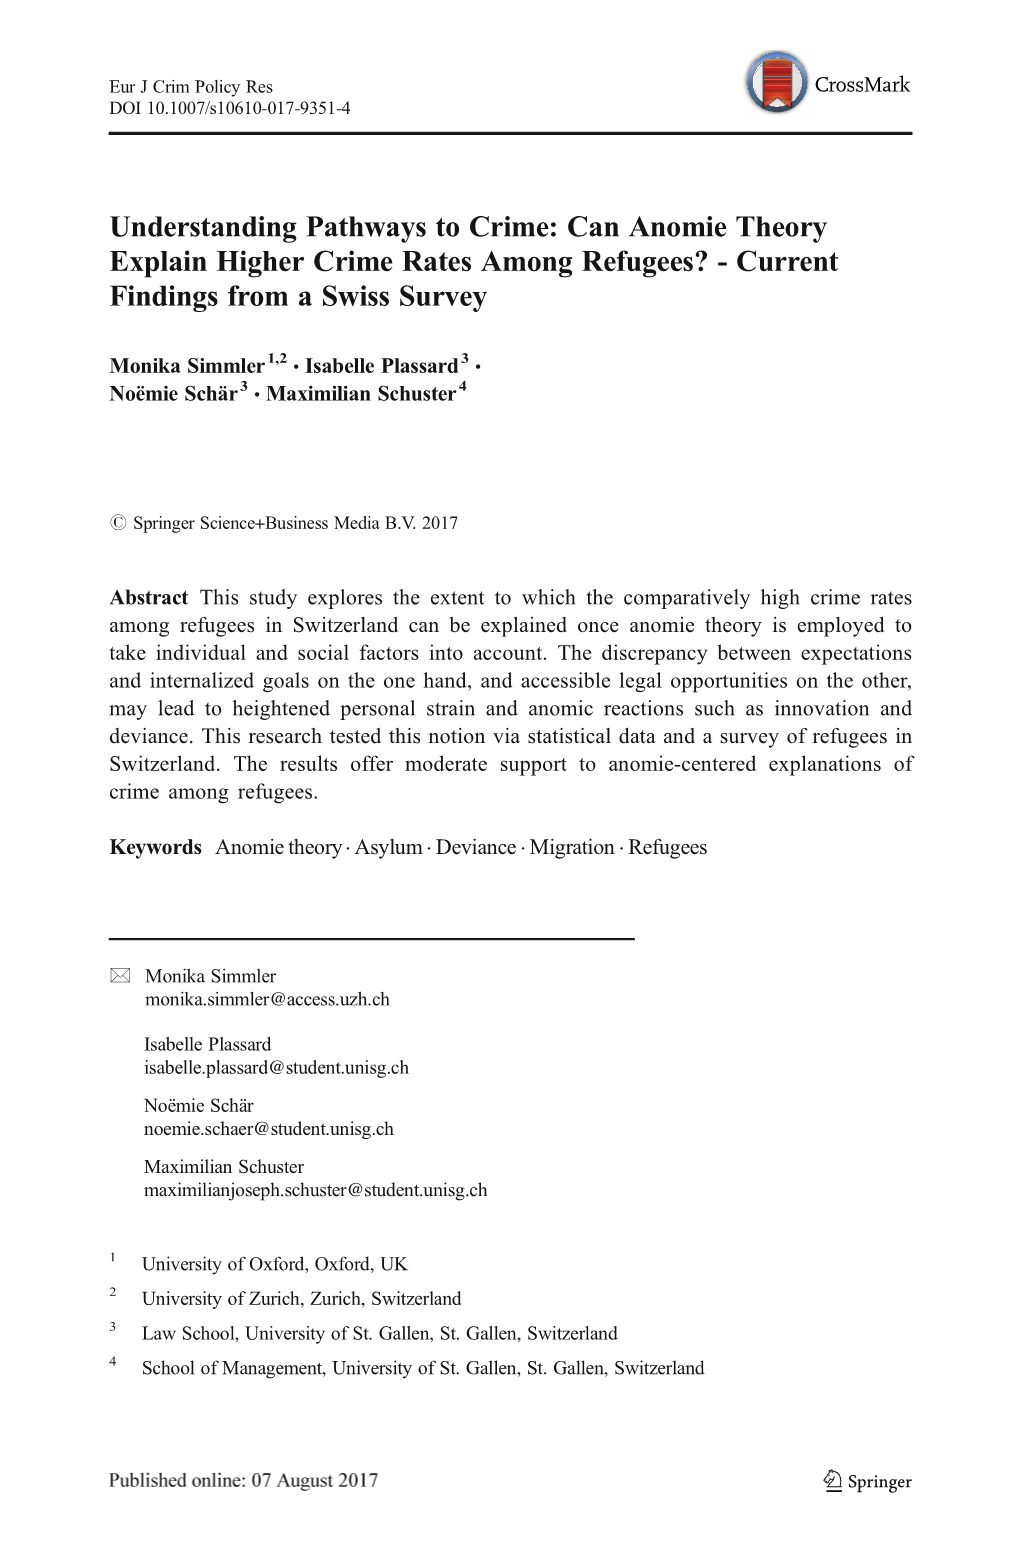 Understanding Pathways to Crime: Can Anomie Theory Explain Higher Crime Rates Among Refugees? - Current Findings from a Swiss Survey